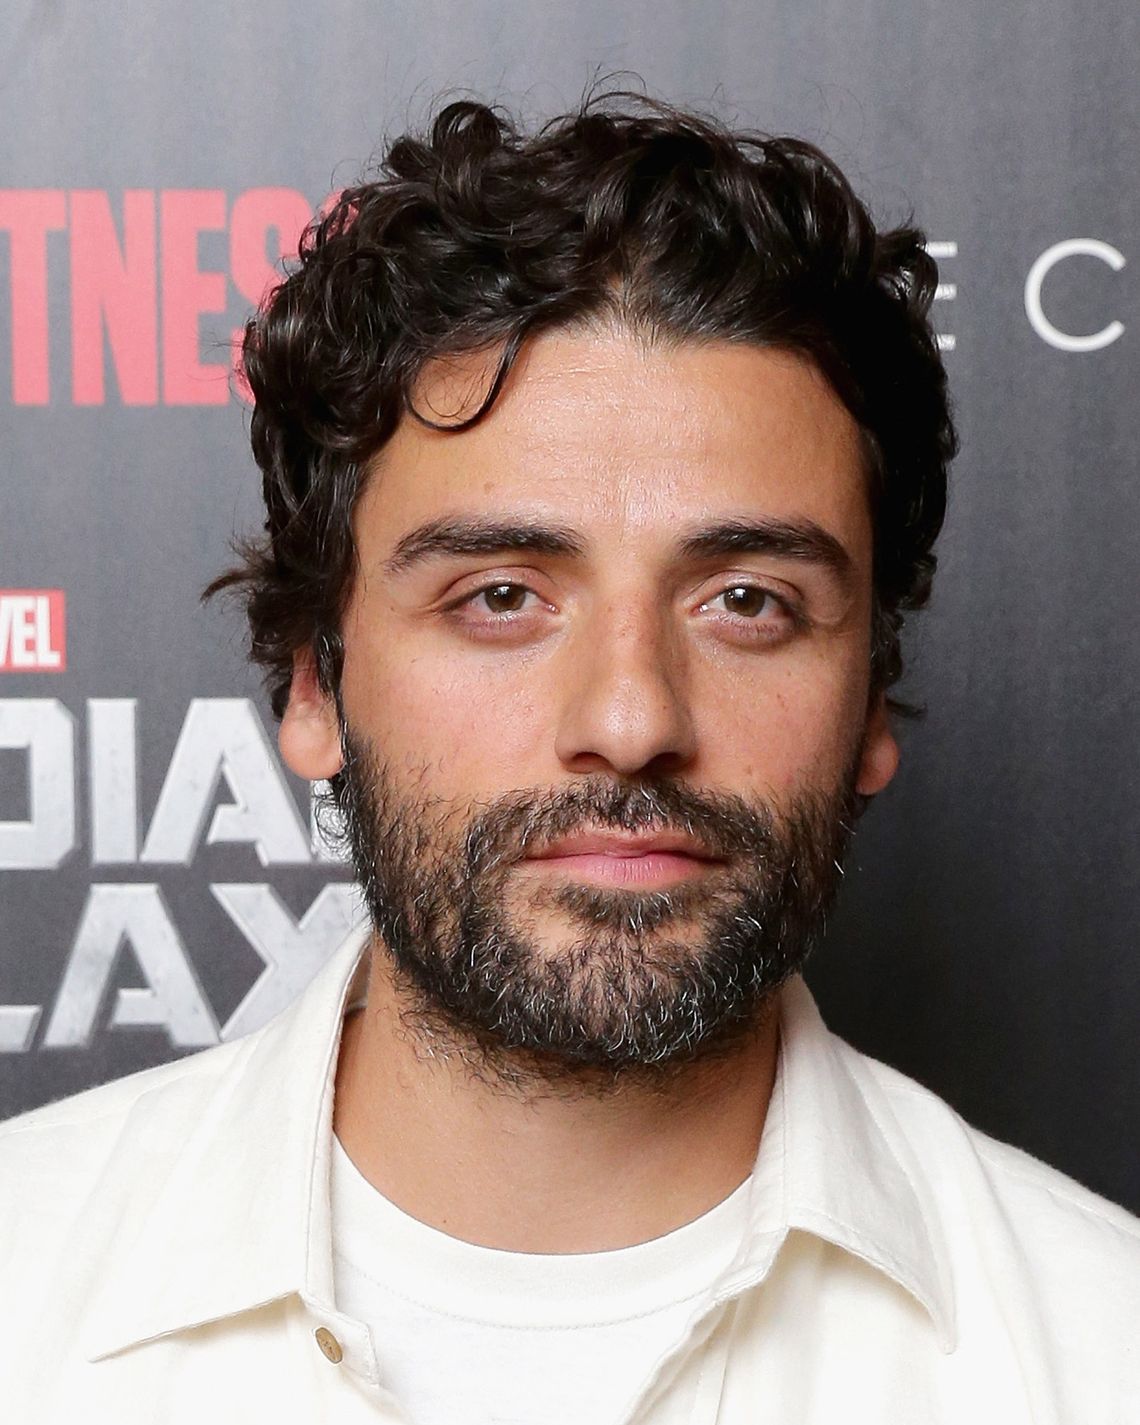 Yes, Oscar Isaac Is the Hottest Man of the Year